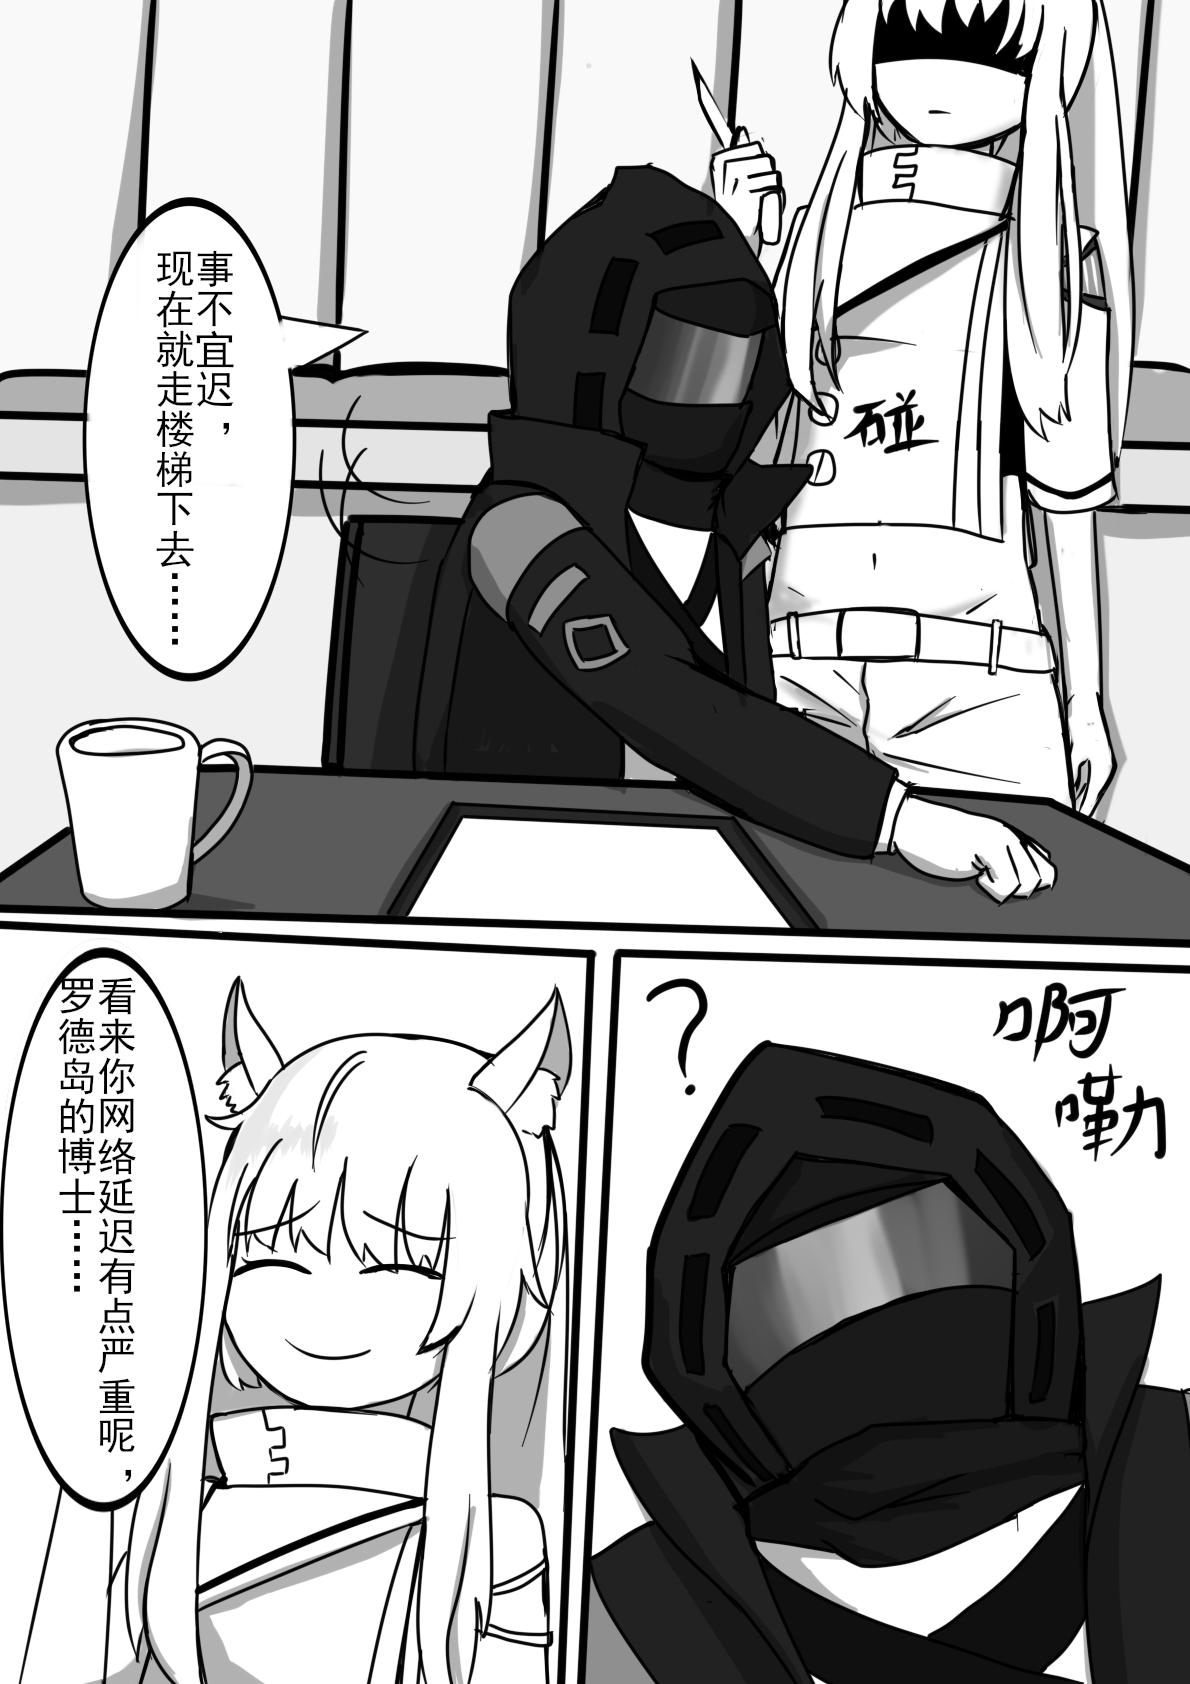 Brazil 白马？ - Arknights Transsexual - Page 4